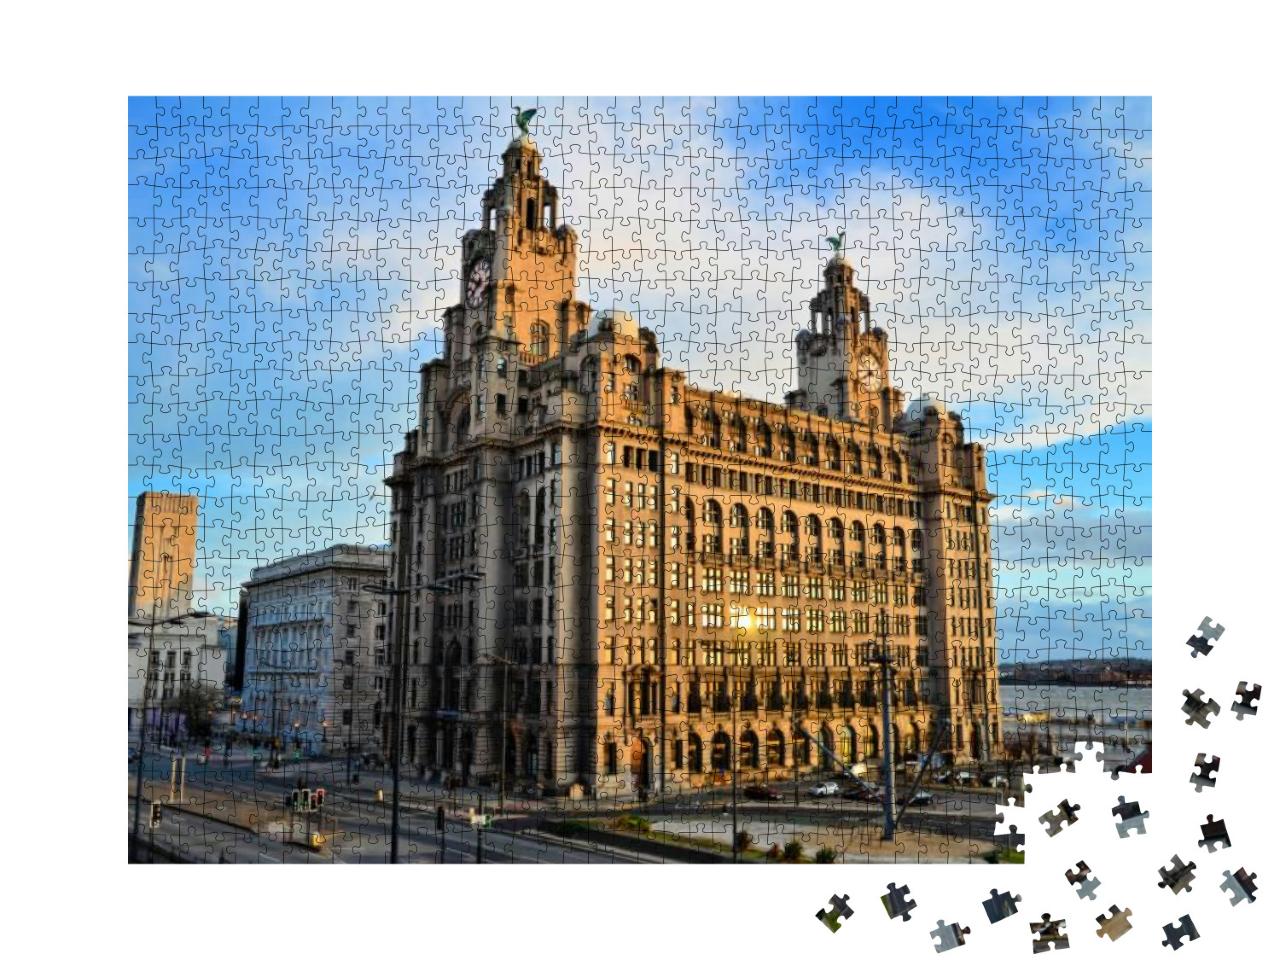 The Royal Liver Building on the Pierhead At Liverpool... Jigsaw Puzzle with 1000 pieces